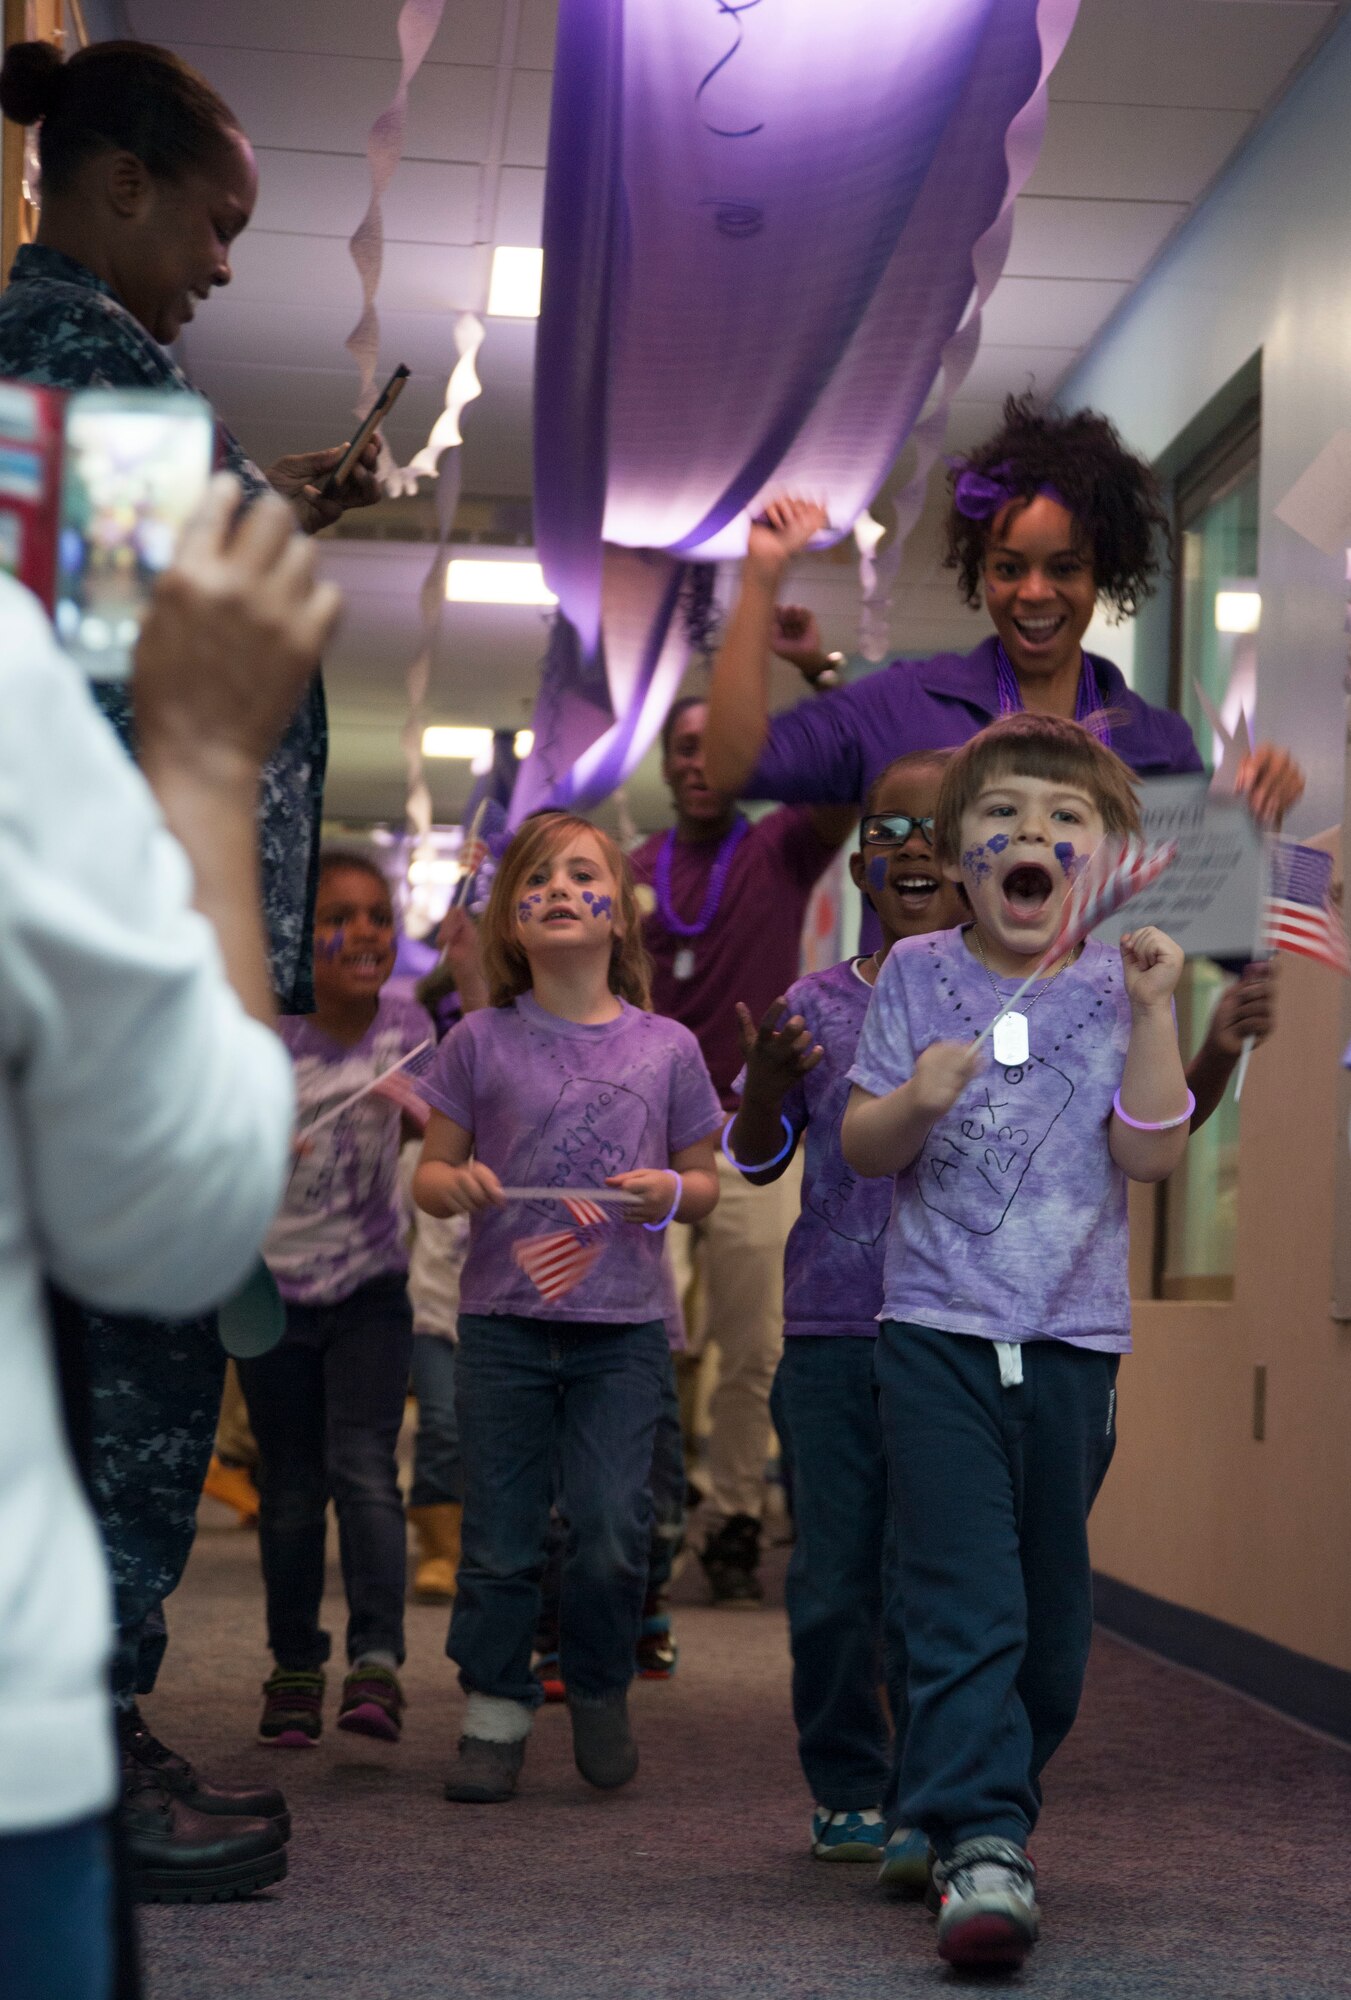 Students and staff of the Joint Base Andrews Child Development Center Three march in a “purple” parade April 7, 2016. The parade kicked off Month of the Military Child celebration, a time to honor military youth for the important role they play in contributing to the strength of the military family. (U.S. Air Force photo by Airman 1st Class Rustie Kramer/Released) 